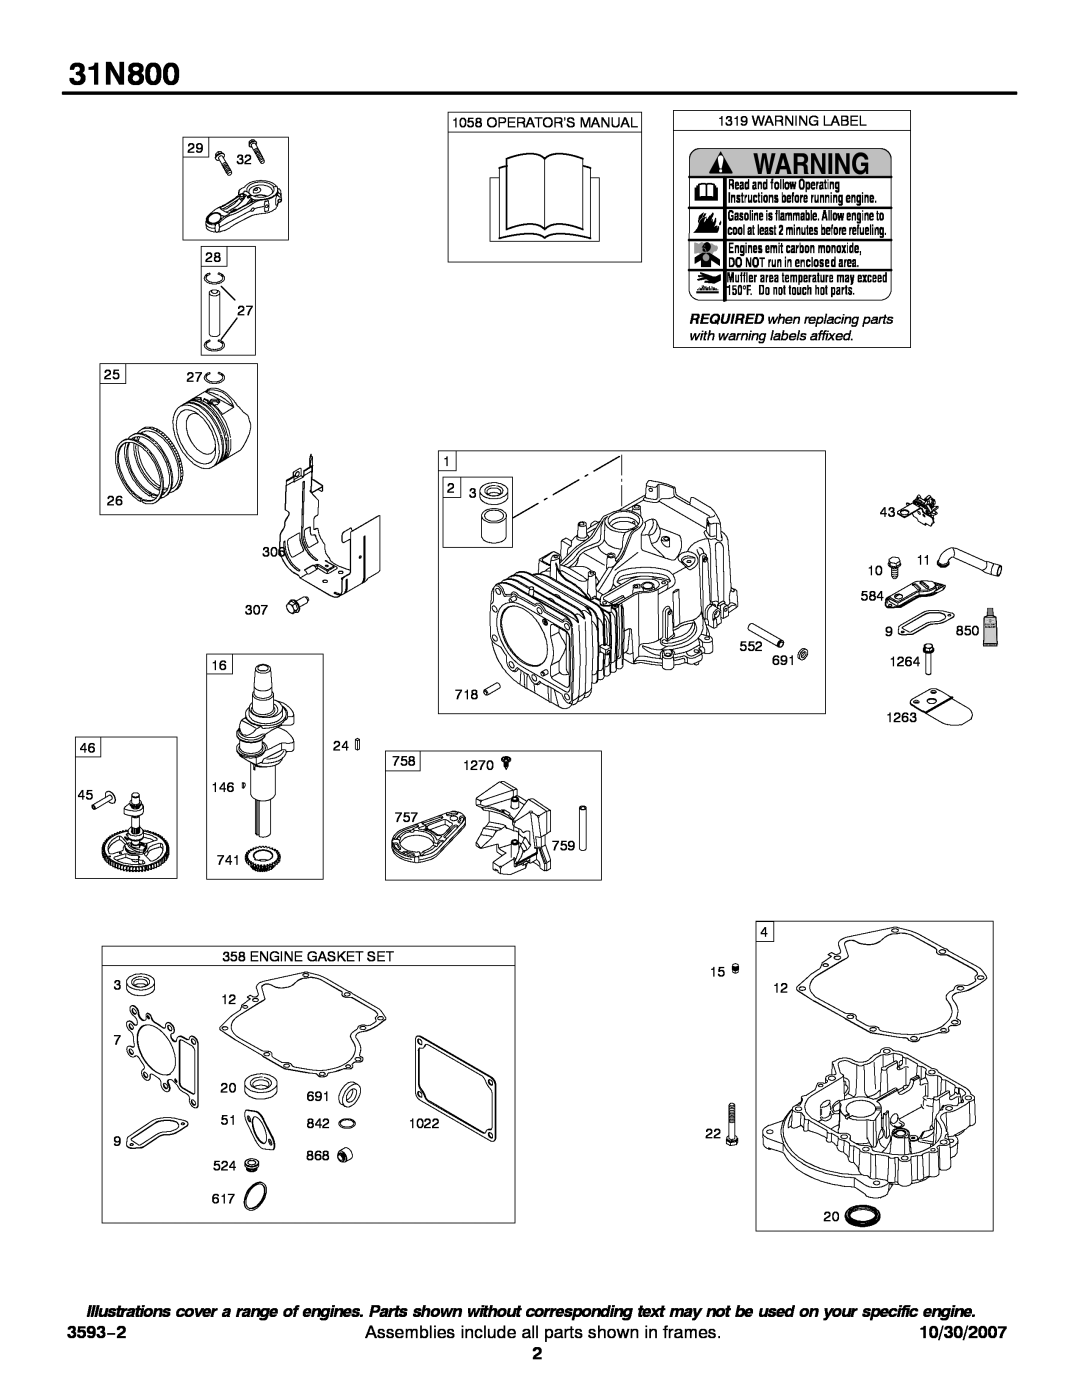 Briggs & Stratton 31N800 service manual 3593−2, Assemblies include all parts shown in frames, 10/30/2007 